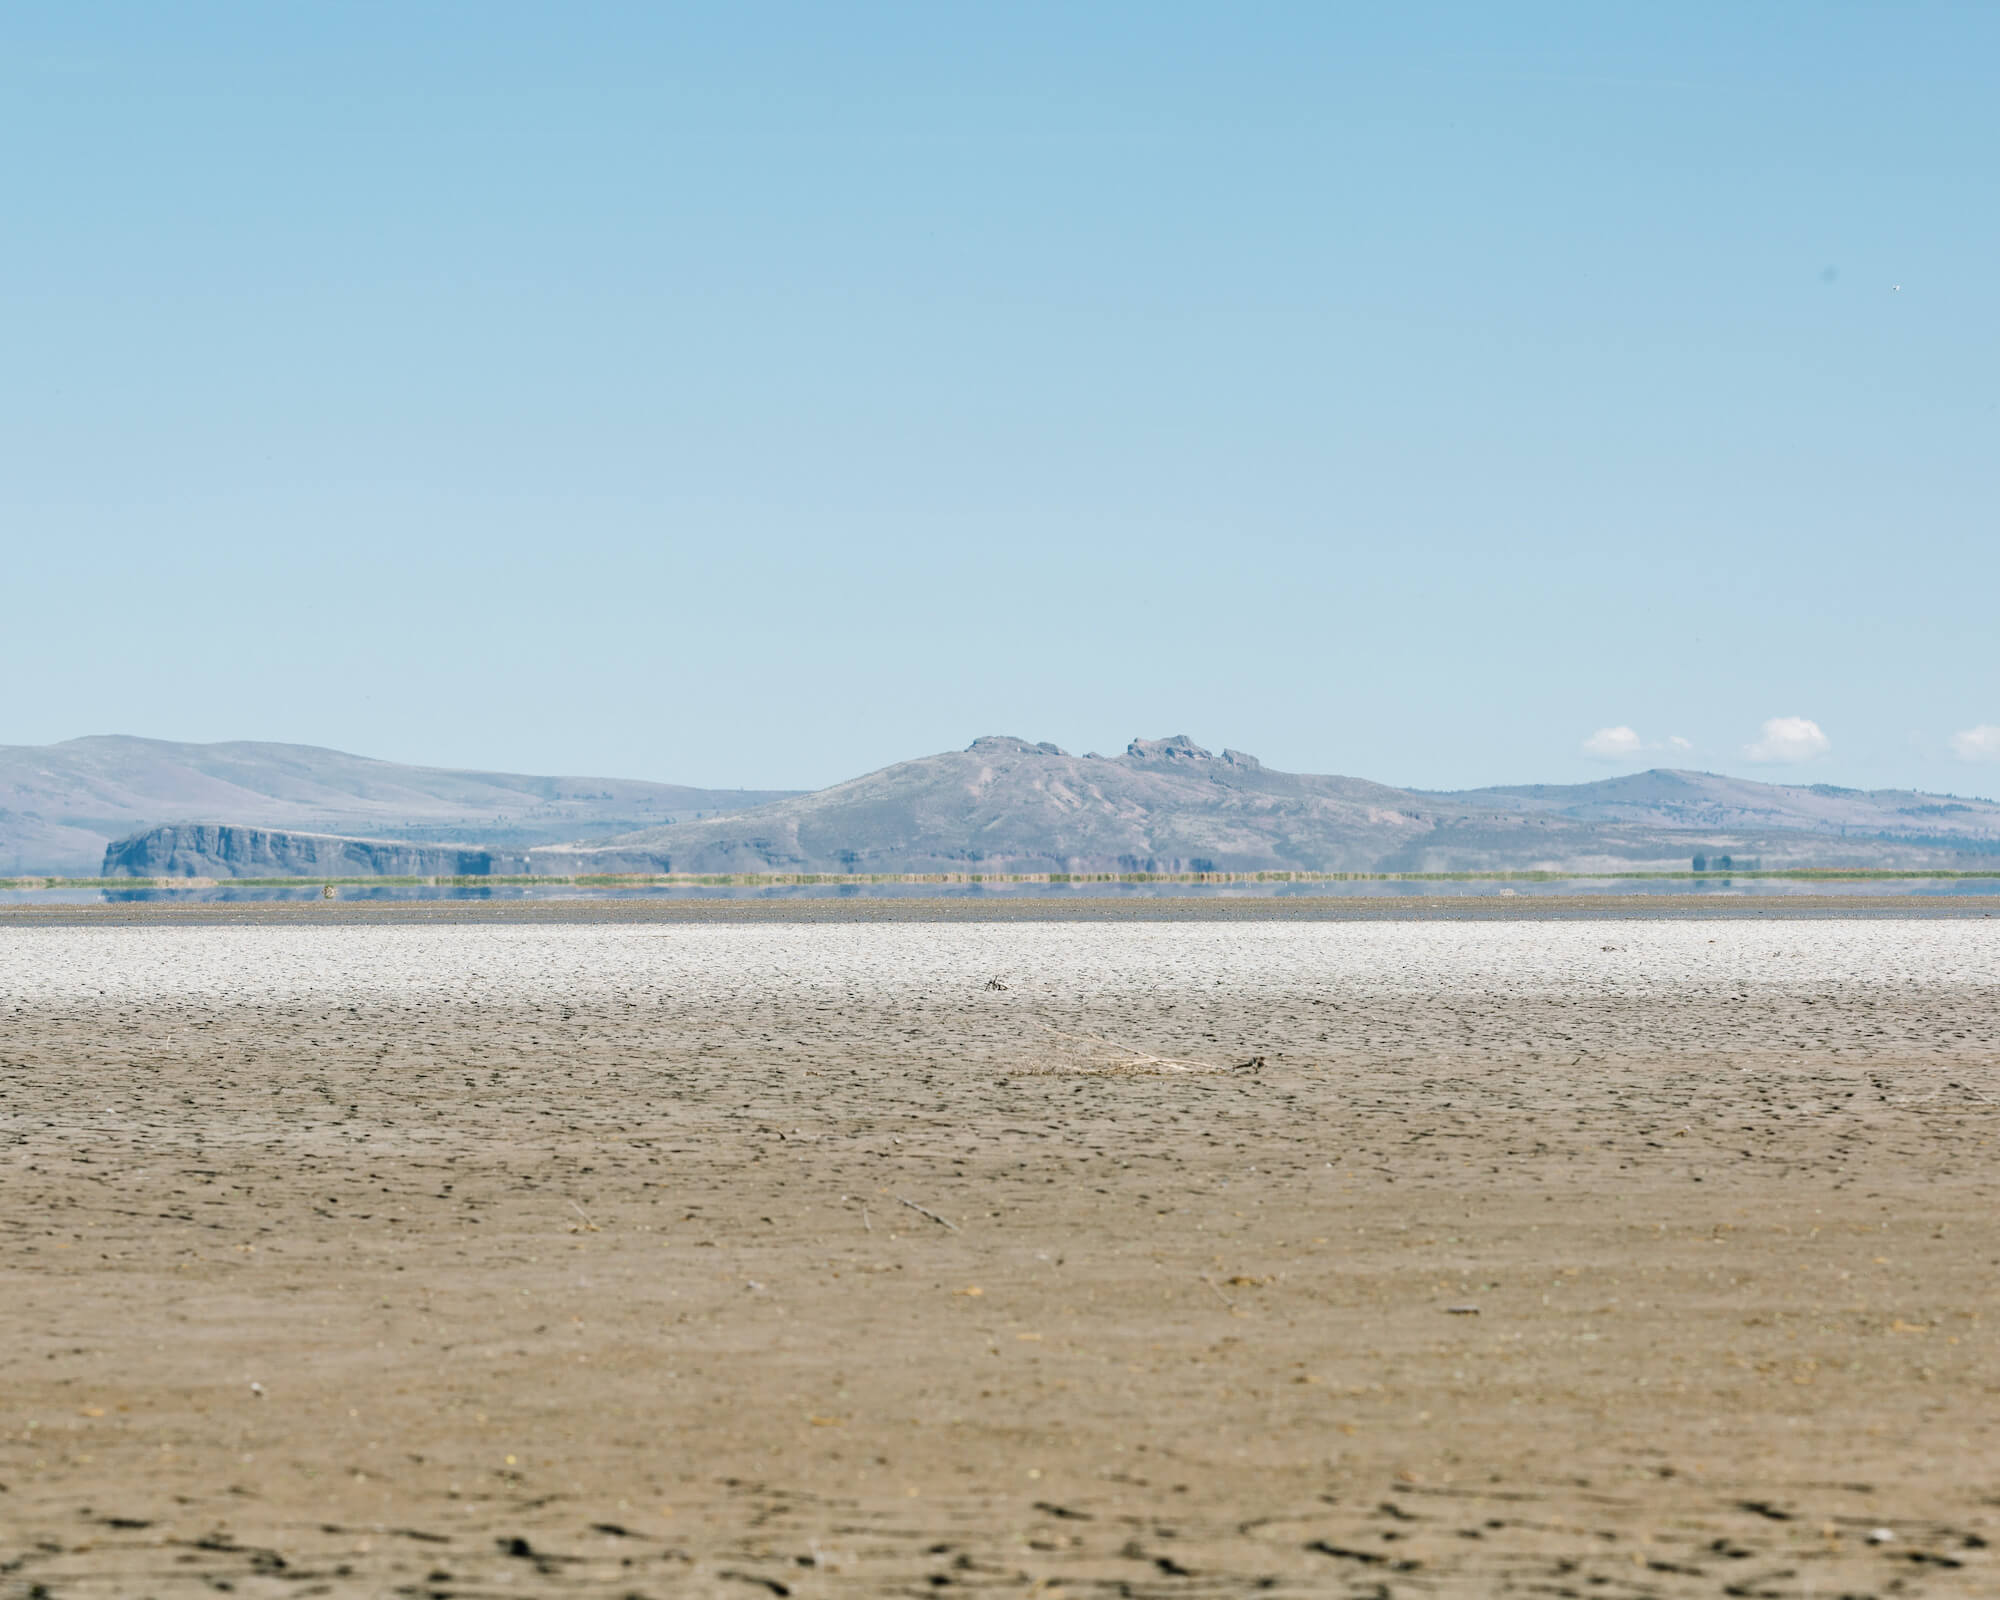 Tule Lake National Refuge on May 28, 2021, in California, near the Oregon border, has been severely impacted by the drought and the lack of irrigation waters from Upper Klamath Lake, which usally feed into the refuge. June 2021